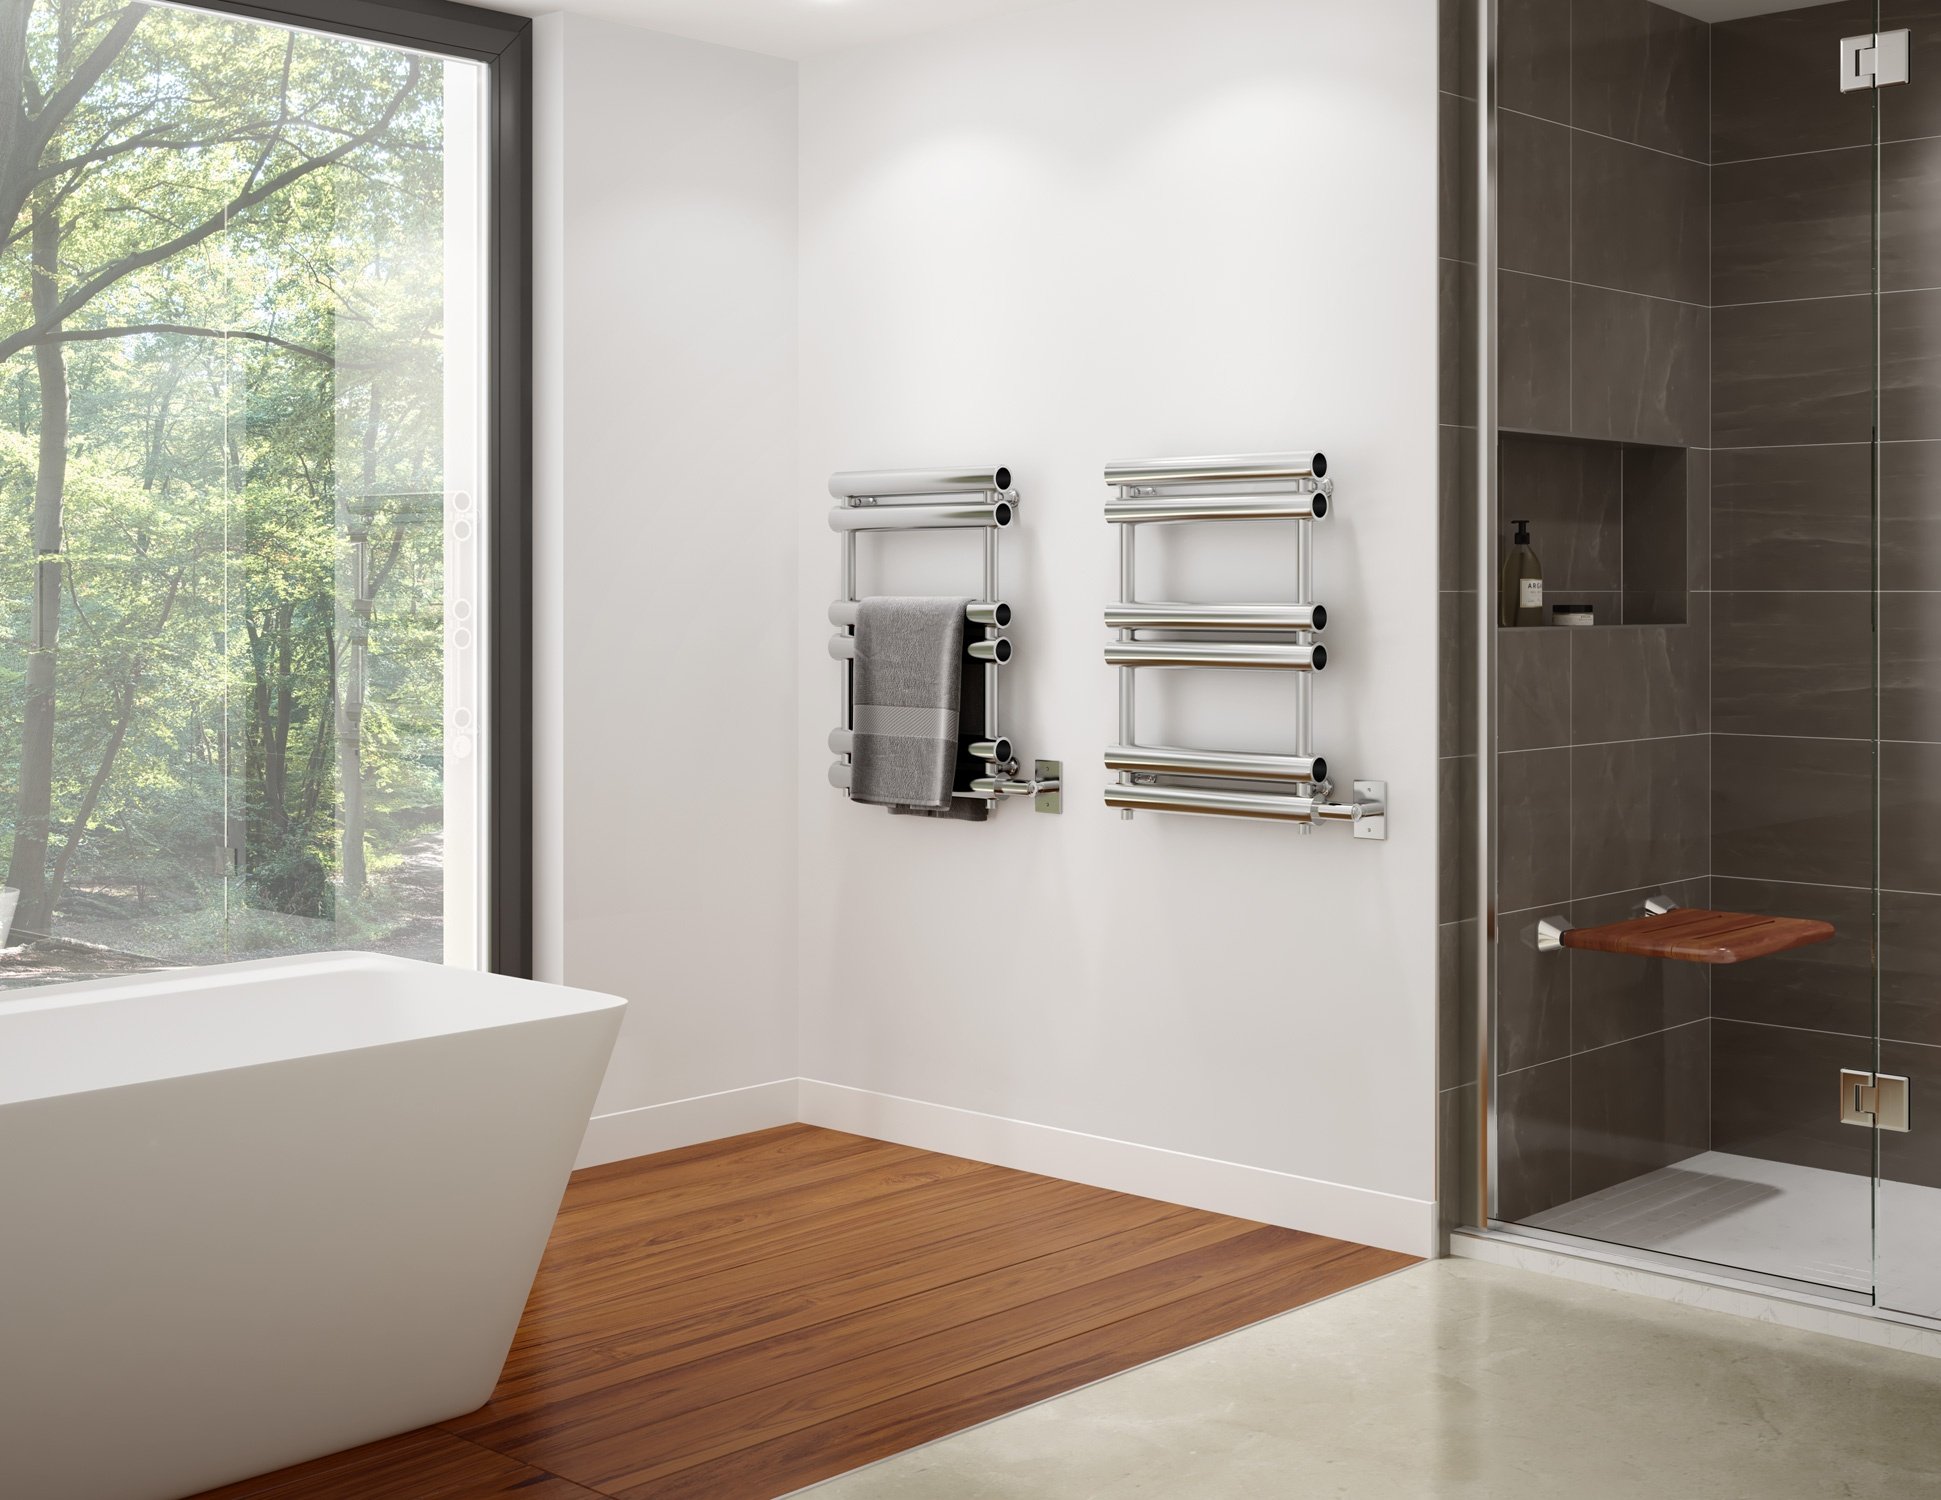 Lexington Collection towel warmers from MrSteam